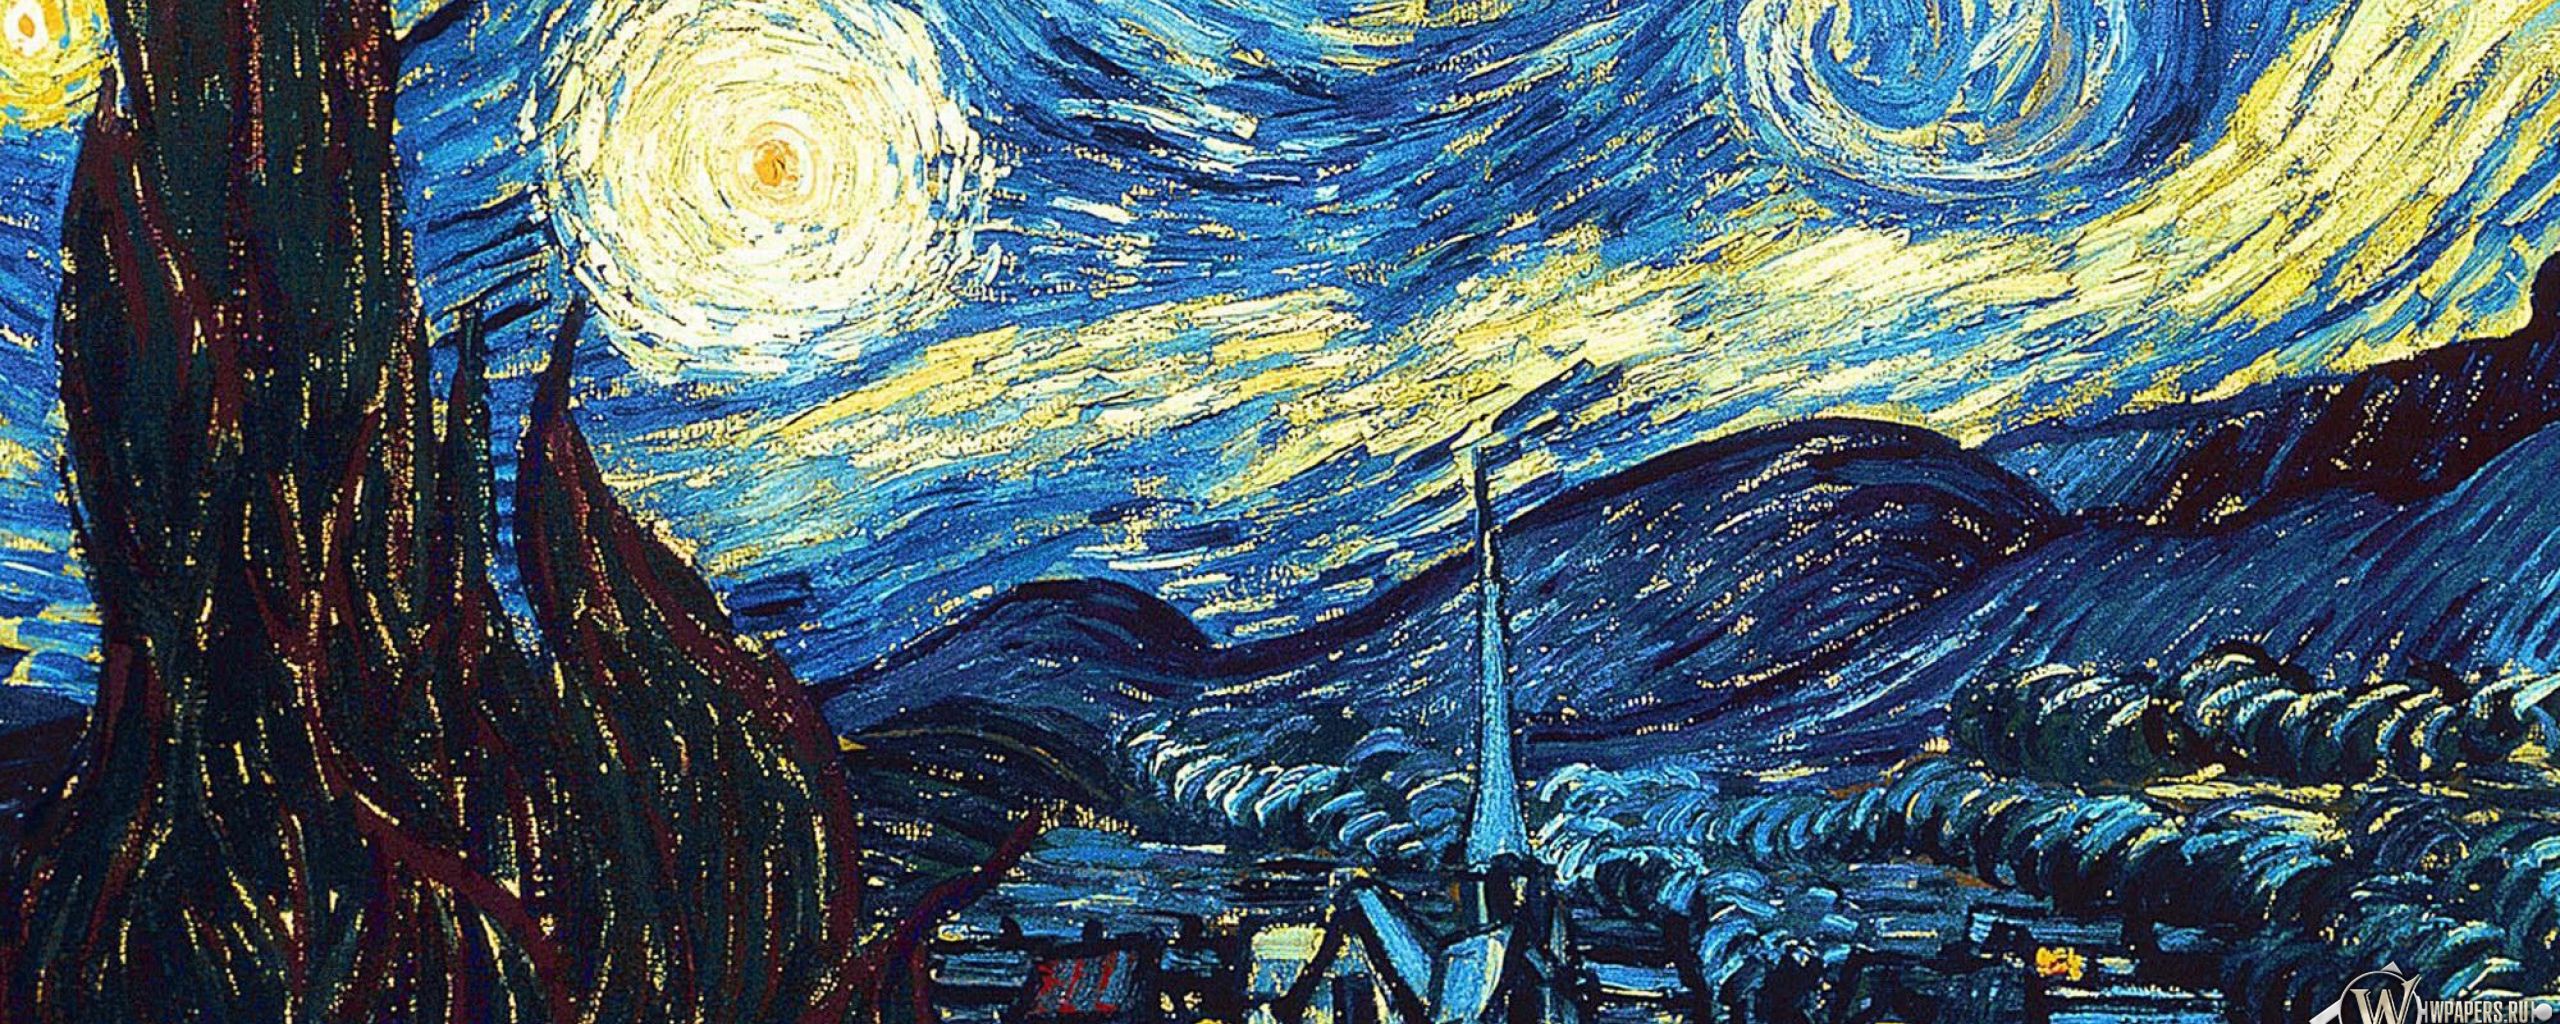 Download wallpaper 2560x1024 vincent van gogh, the starry night, oil, canvas ultrawide monitor HD background